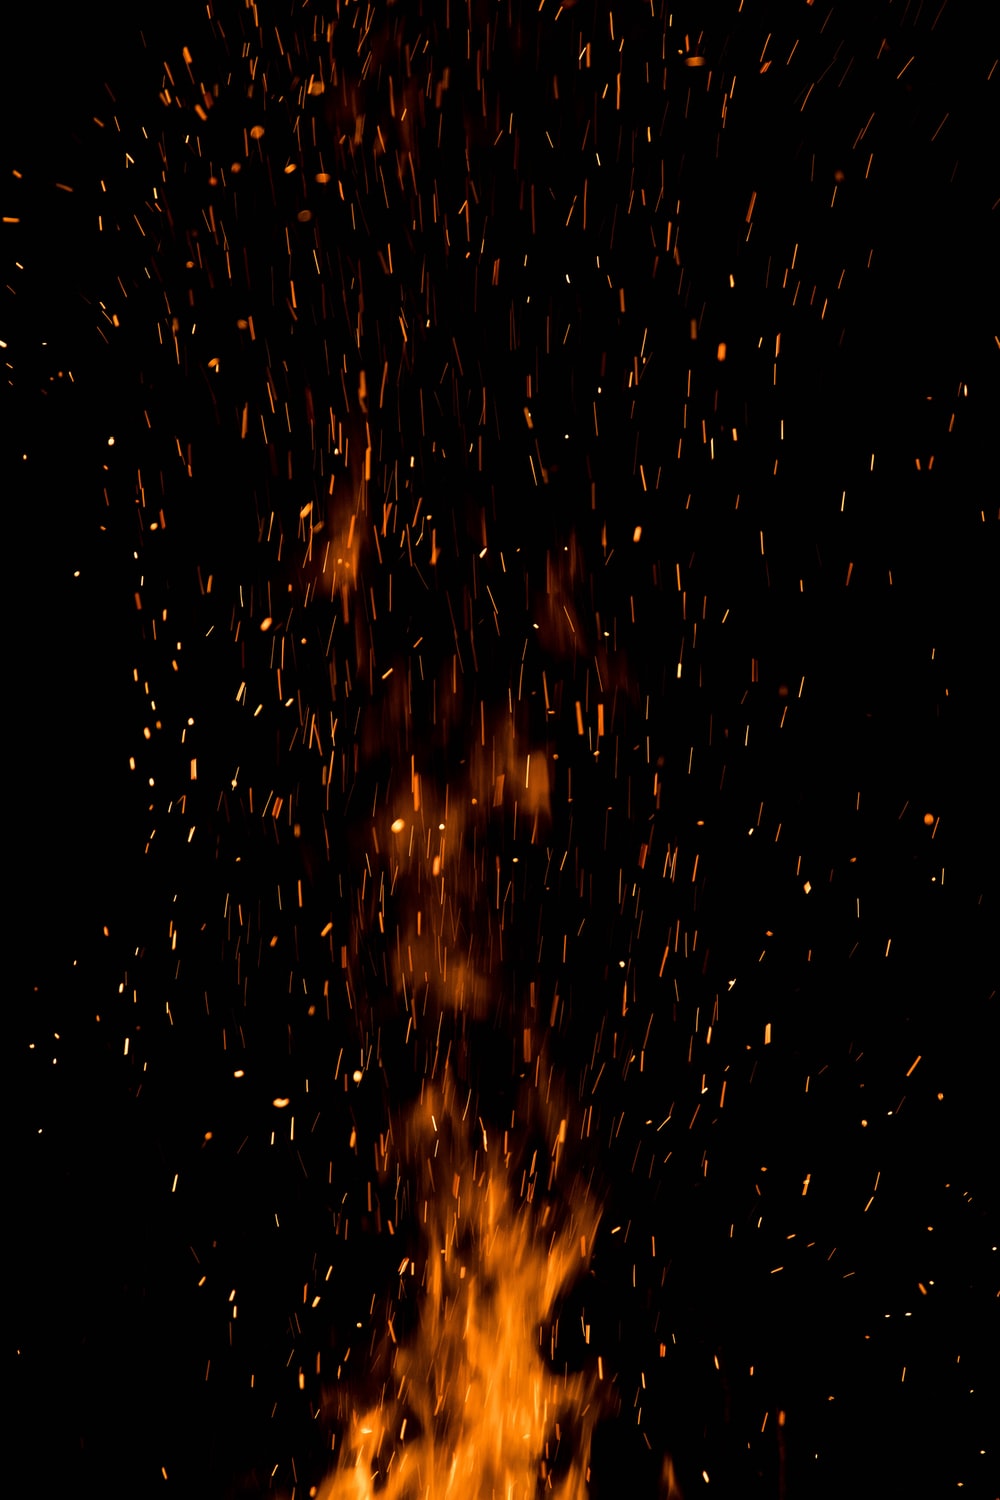 Fire Texture Picture. Download Free Image